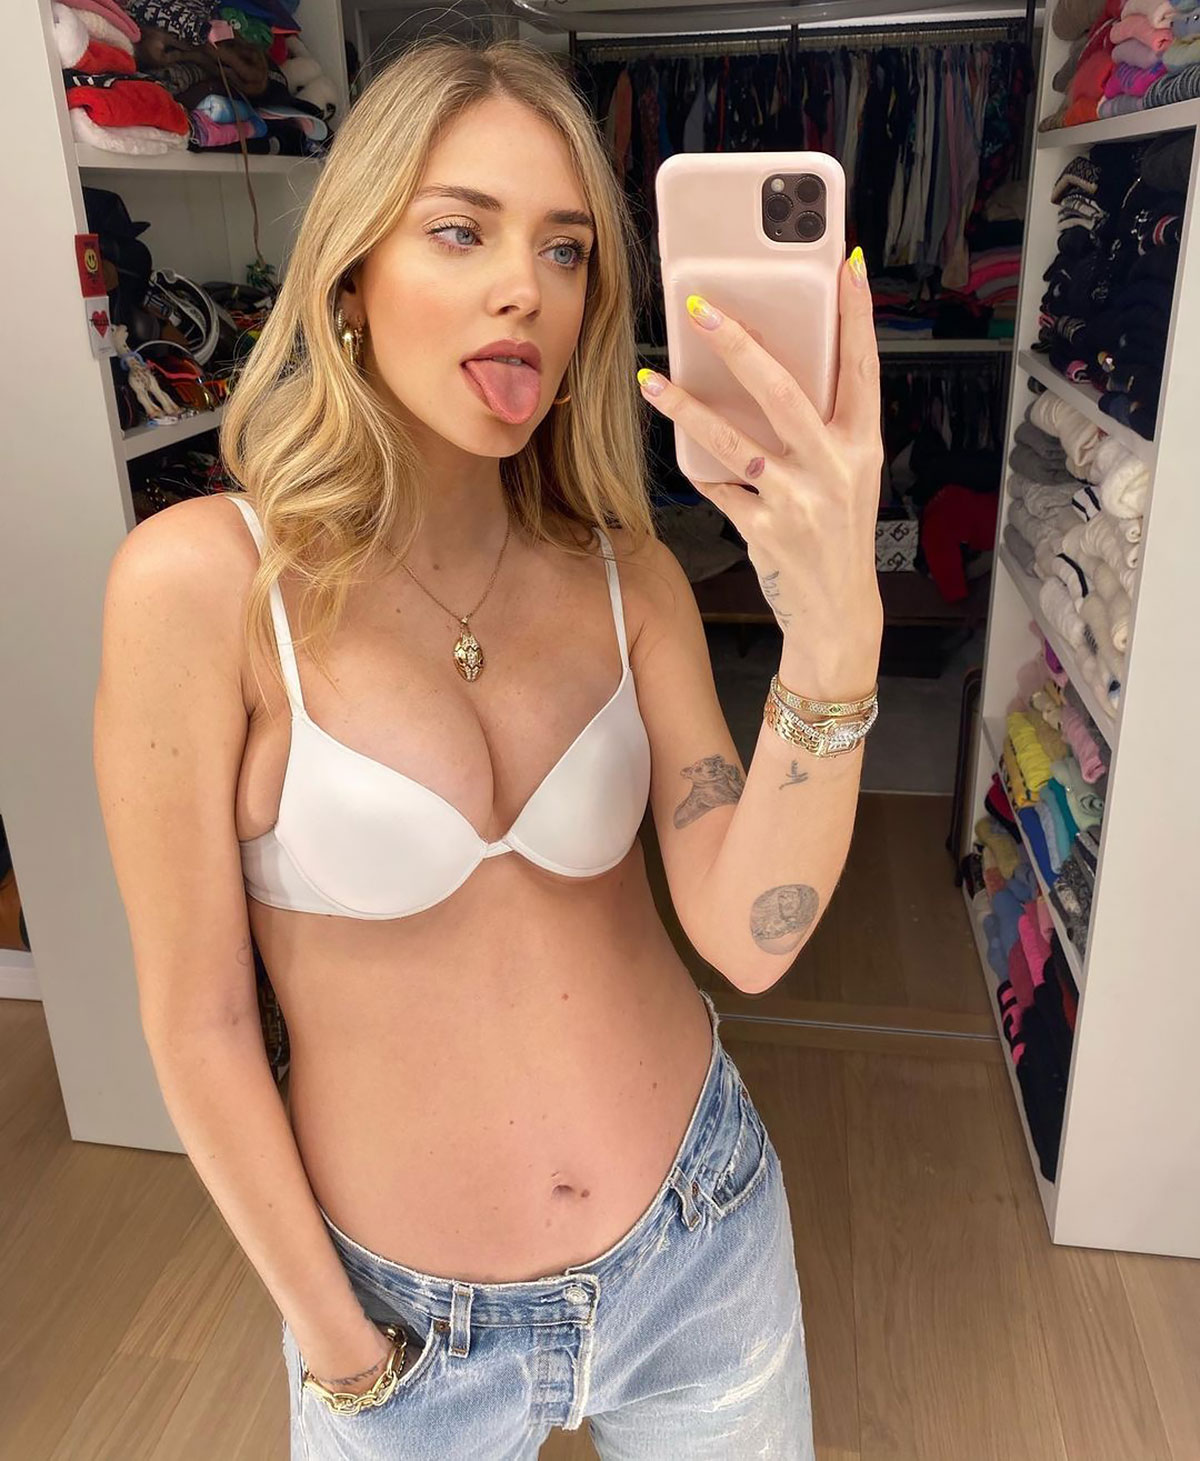 Blonde in lingerie selfie Pregnant Celebs Wear Lingerie While Pregnant Baby Bump Pics